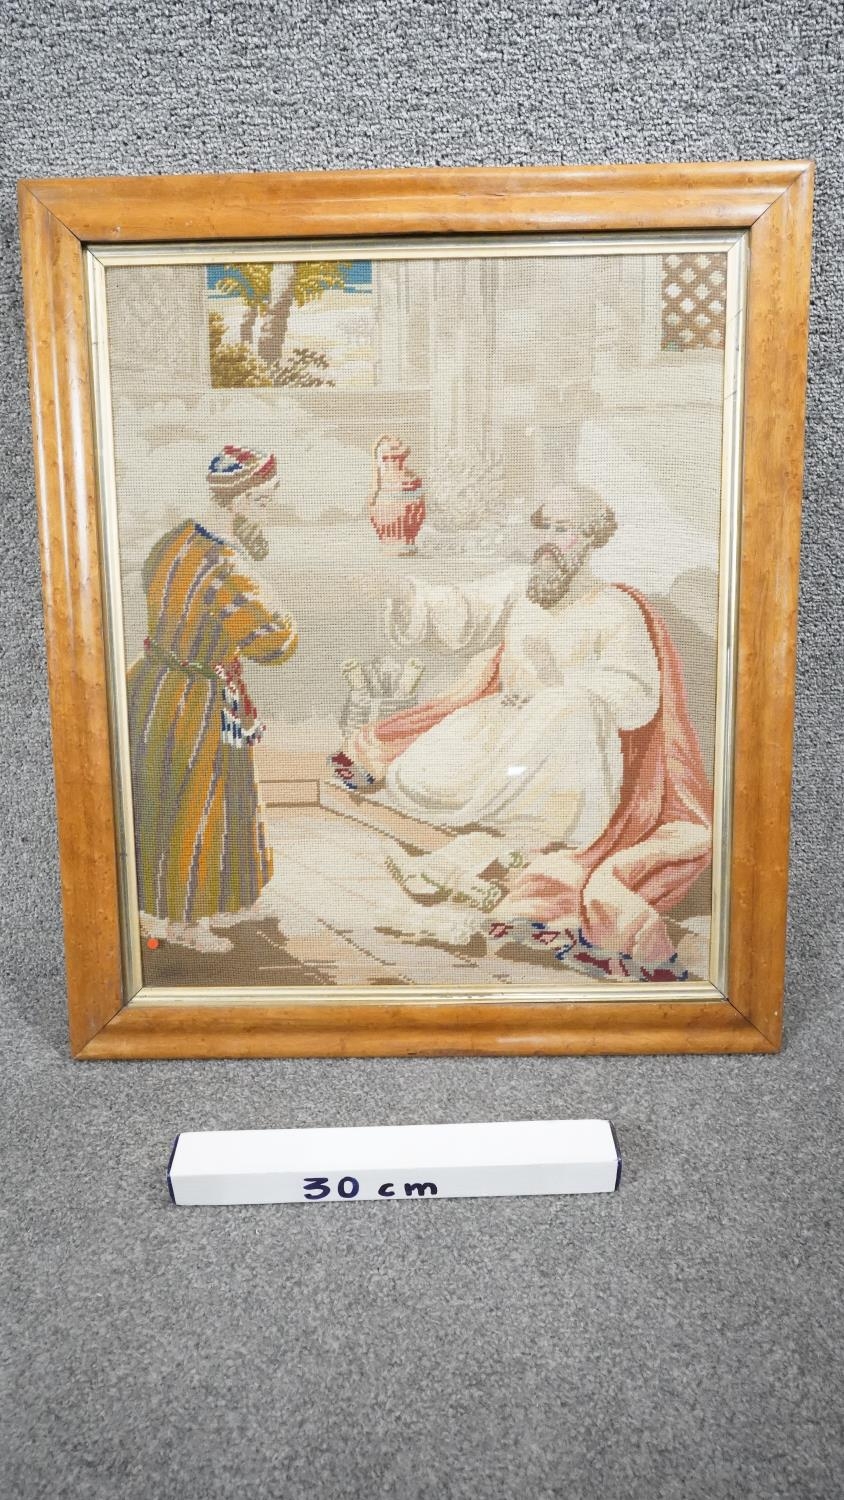 An antique framed and glazed cross stitch tapestry of a Sultan being visited by one of his subjects. - Image 4 of 4